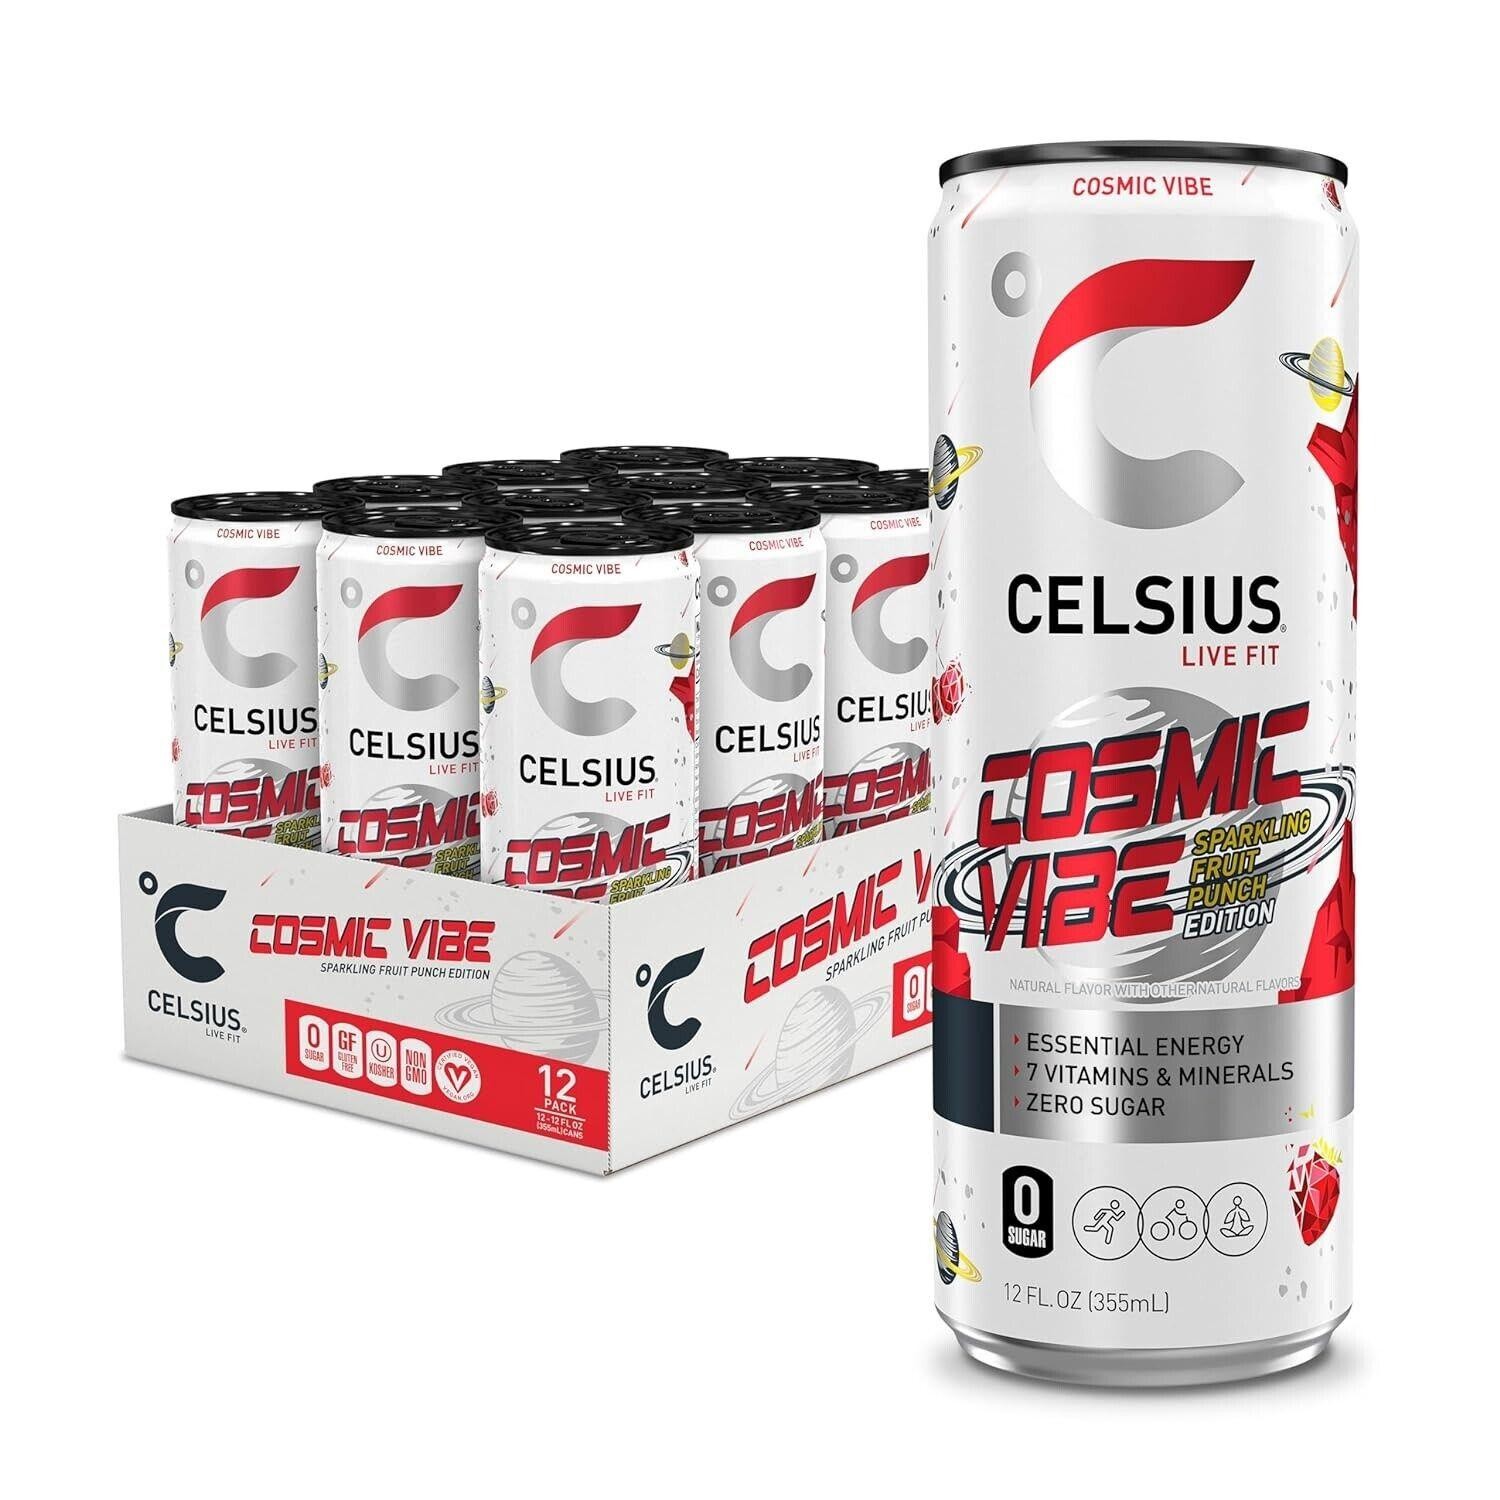 CELSIUS Sparkling Cosmic Vibe  Functional Essential Energy Drink 12 Fl Oz Single Can